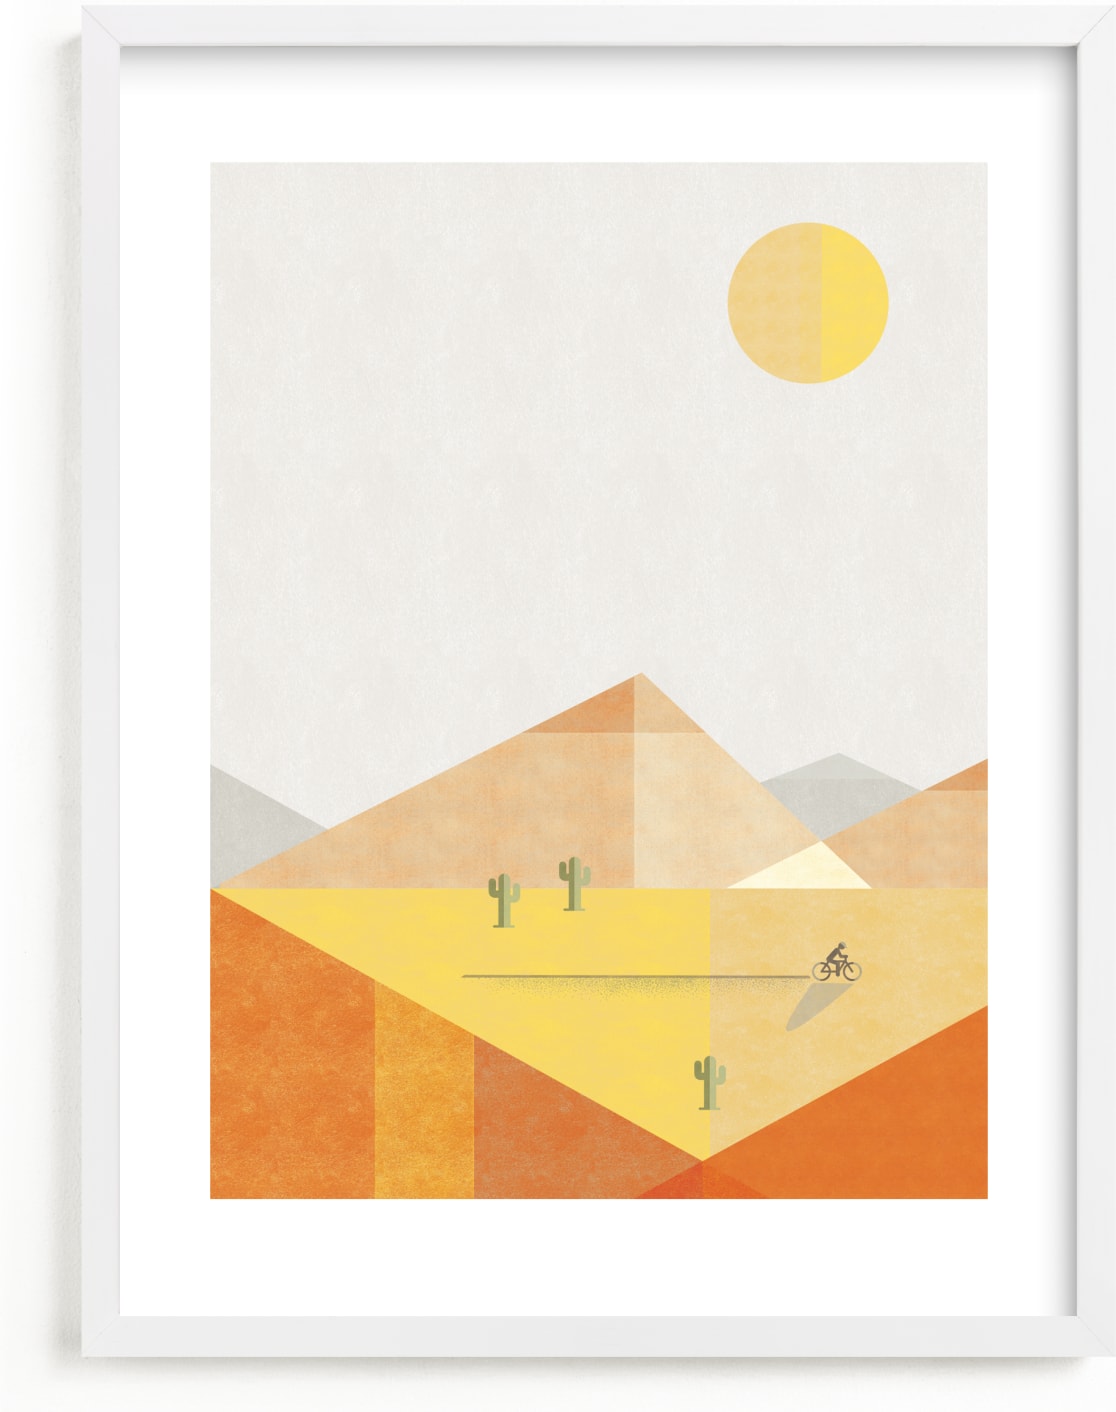 This is a yellow kids wall art by Robert and Stella called Desert Adventure.